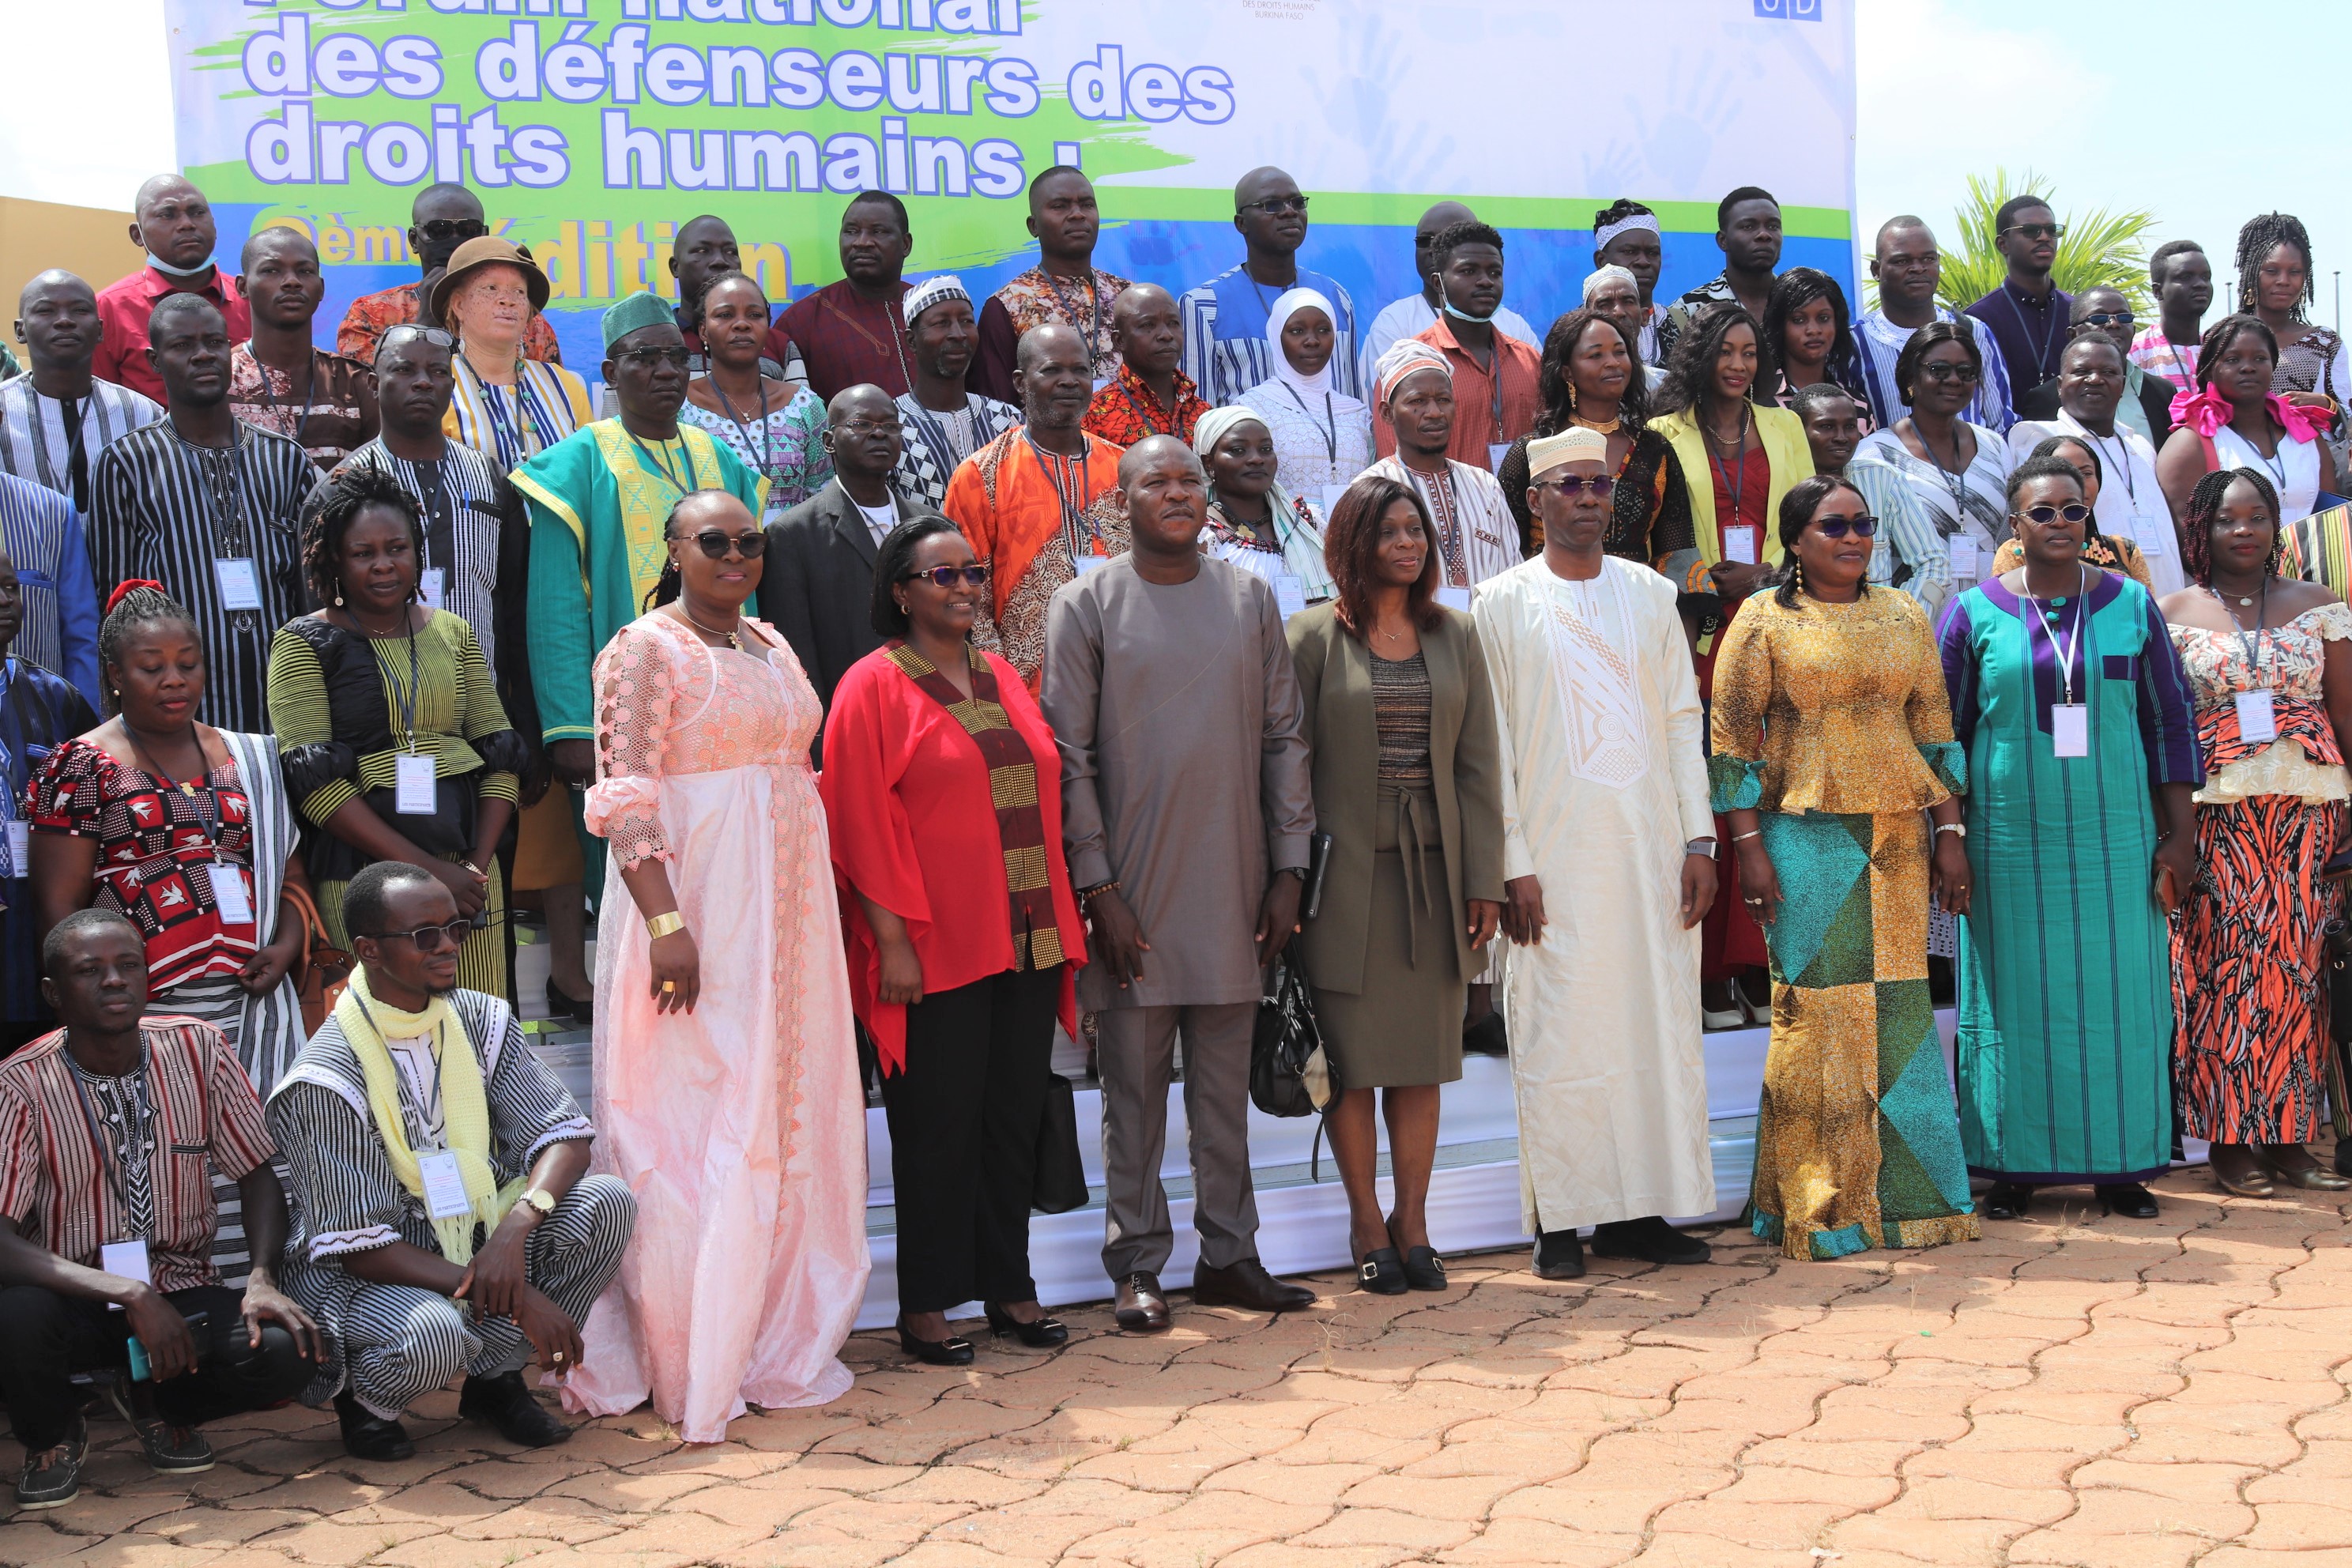 Second Edition of the National Forum of Human Rights Defenders organized in Ouagadougou with the support of UNDP COSED programme, Burkina Faso | UNDP Burkina Faso  